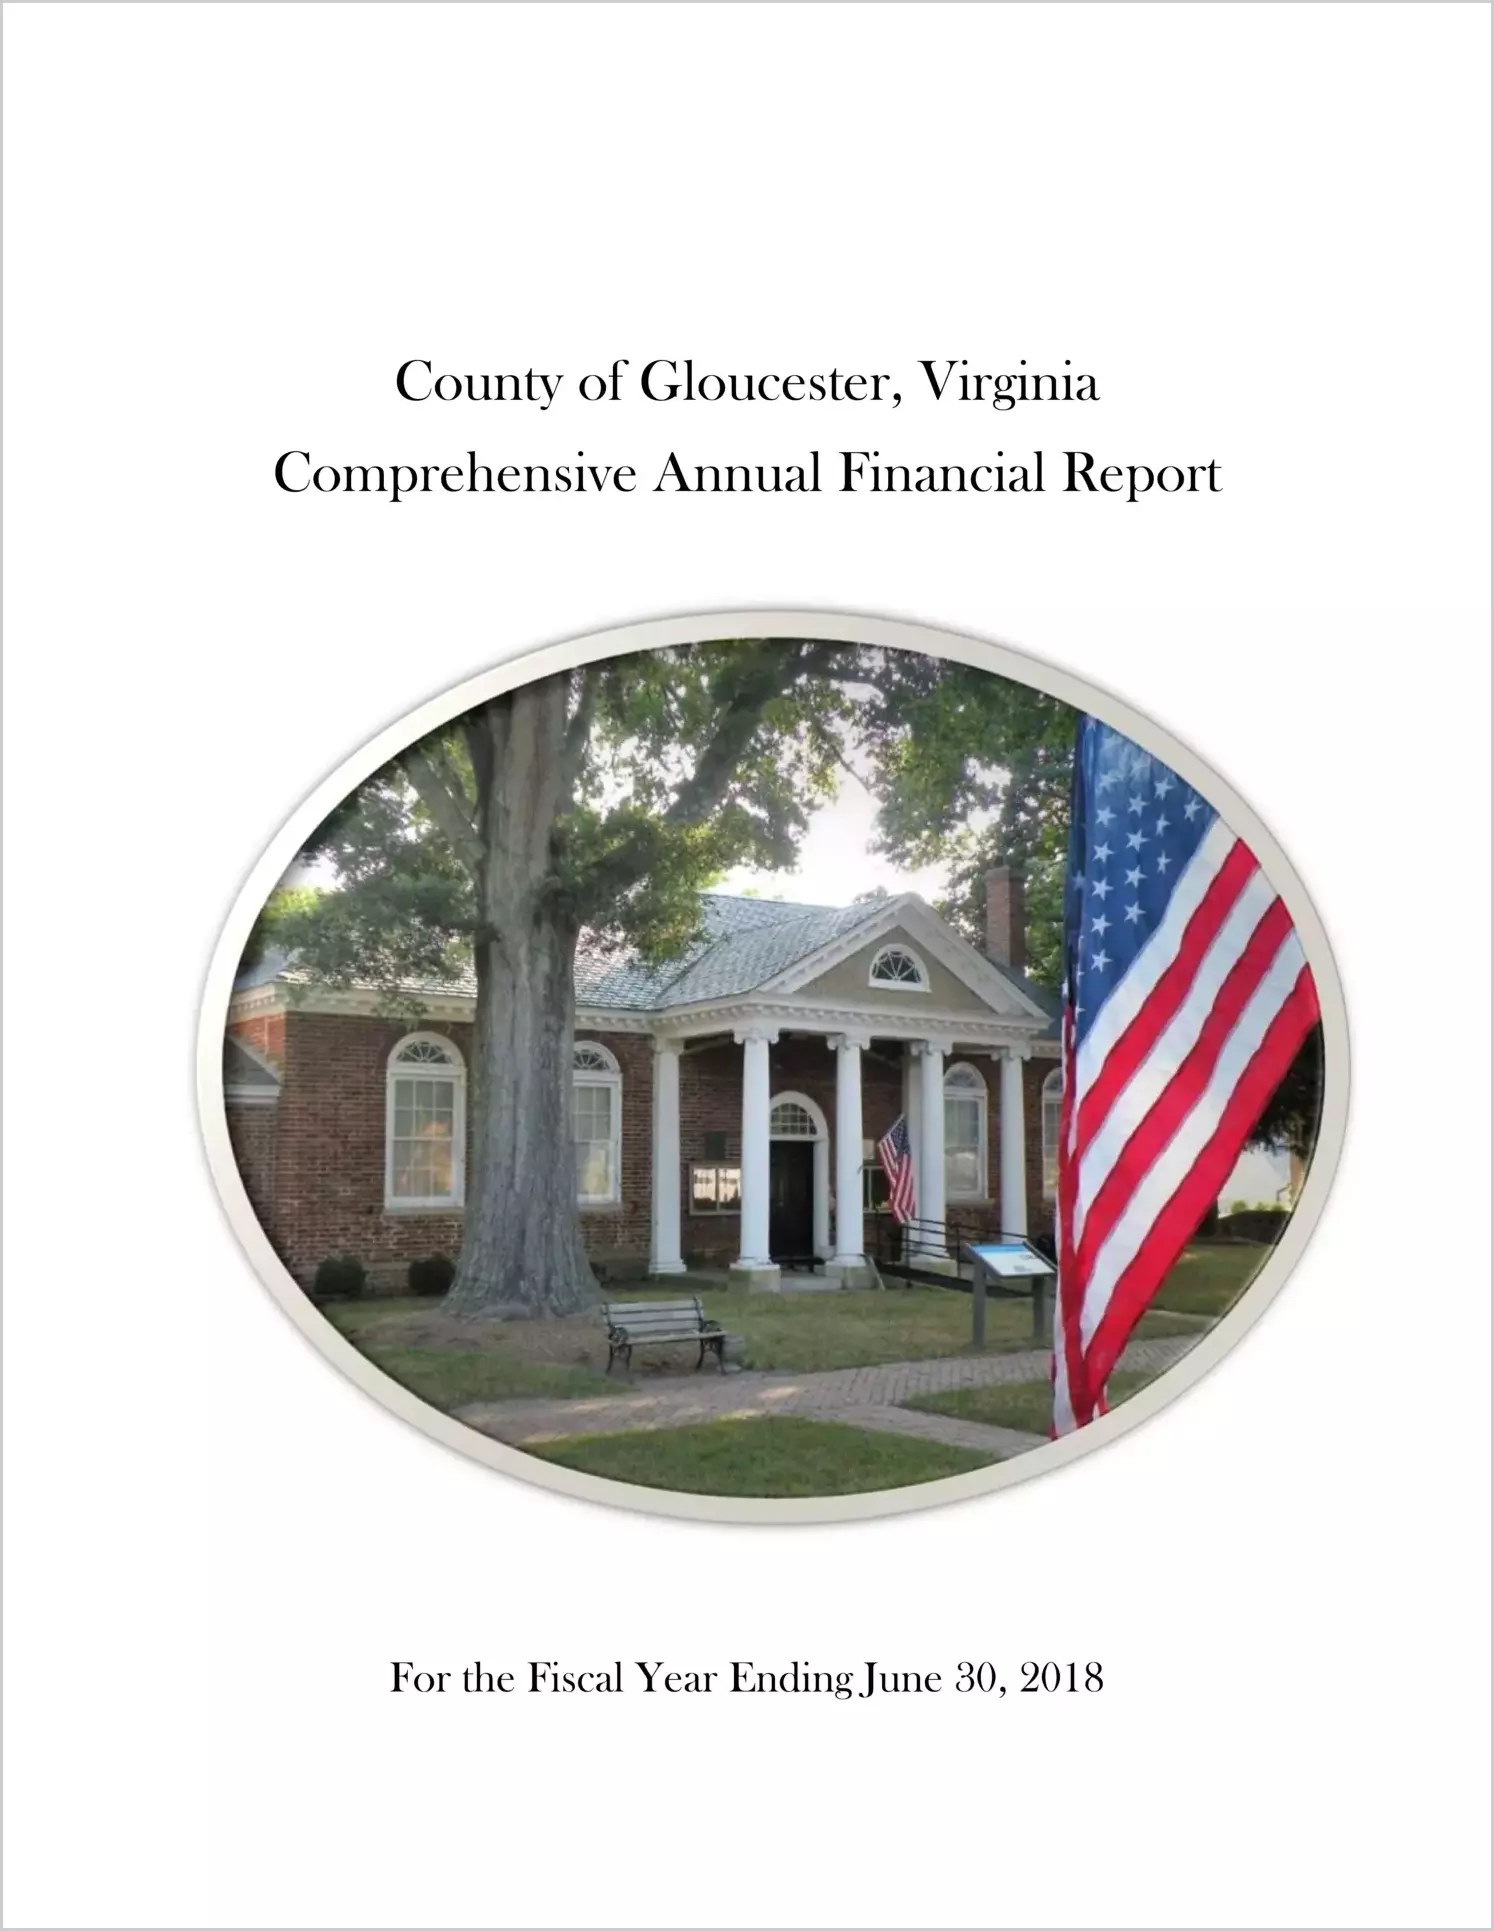 2018 Annual Financial Report for County of Gloucester